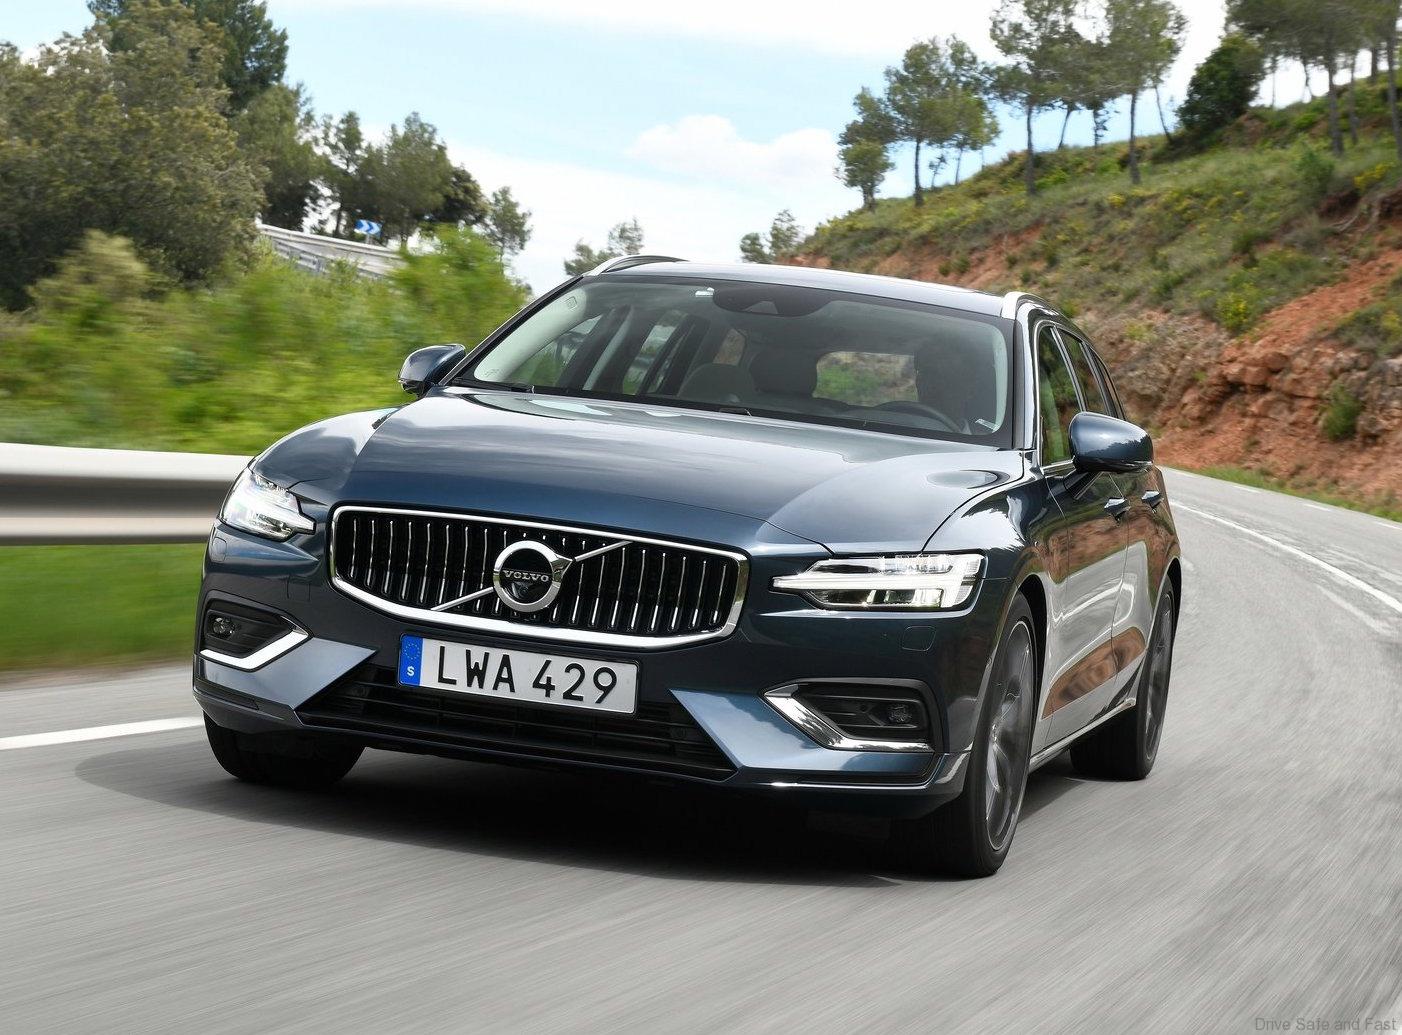 Volvo V60 sports wagon need to know facts